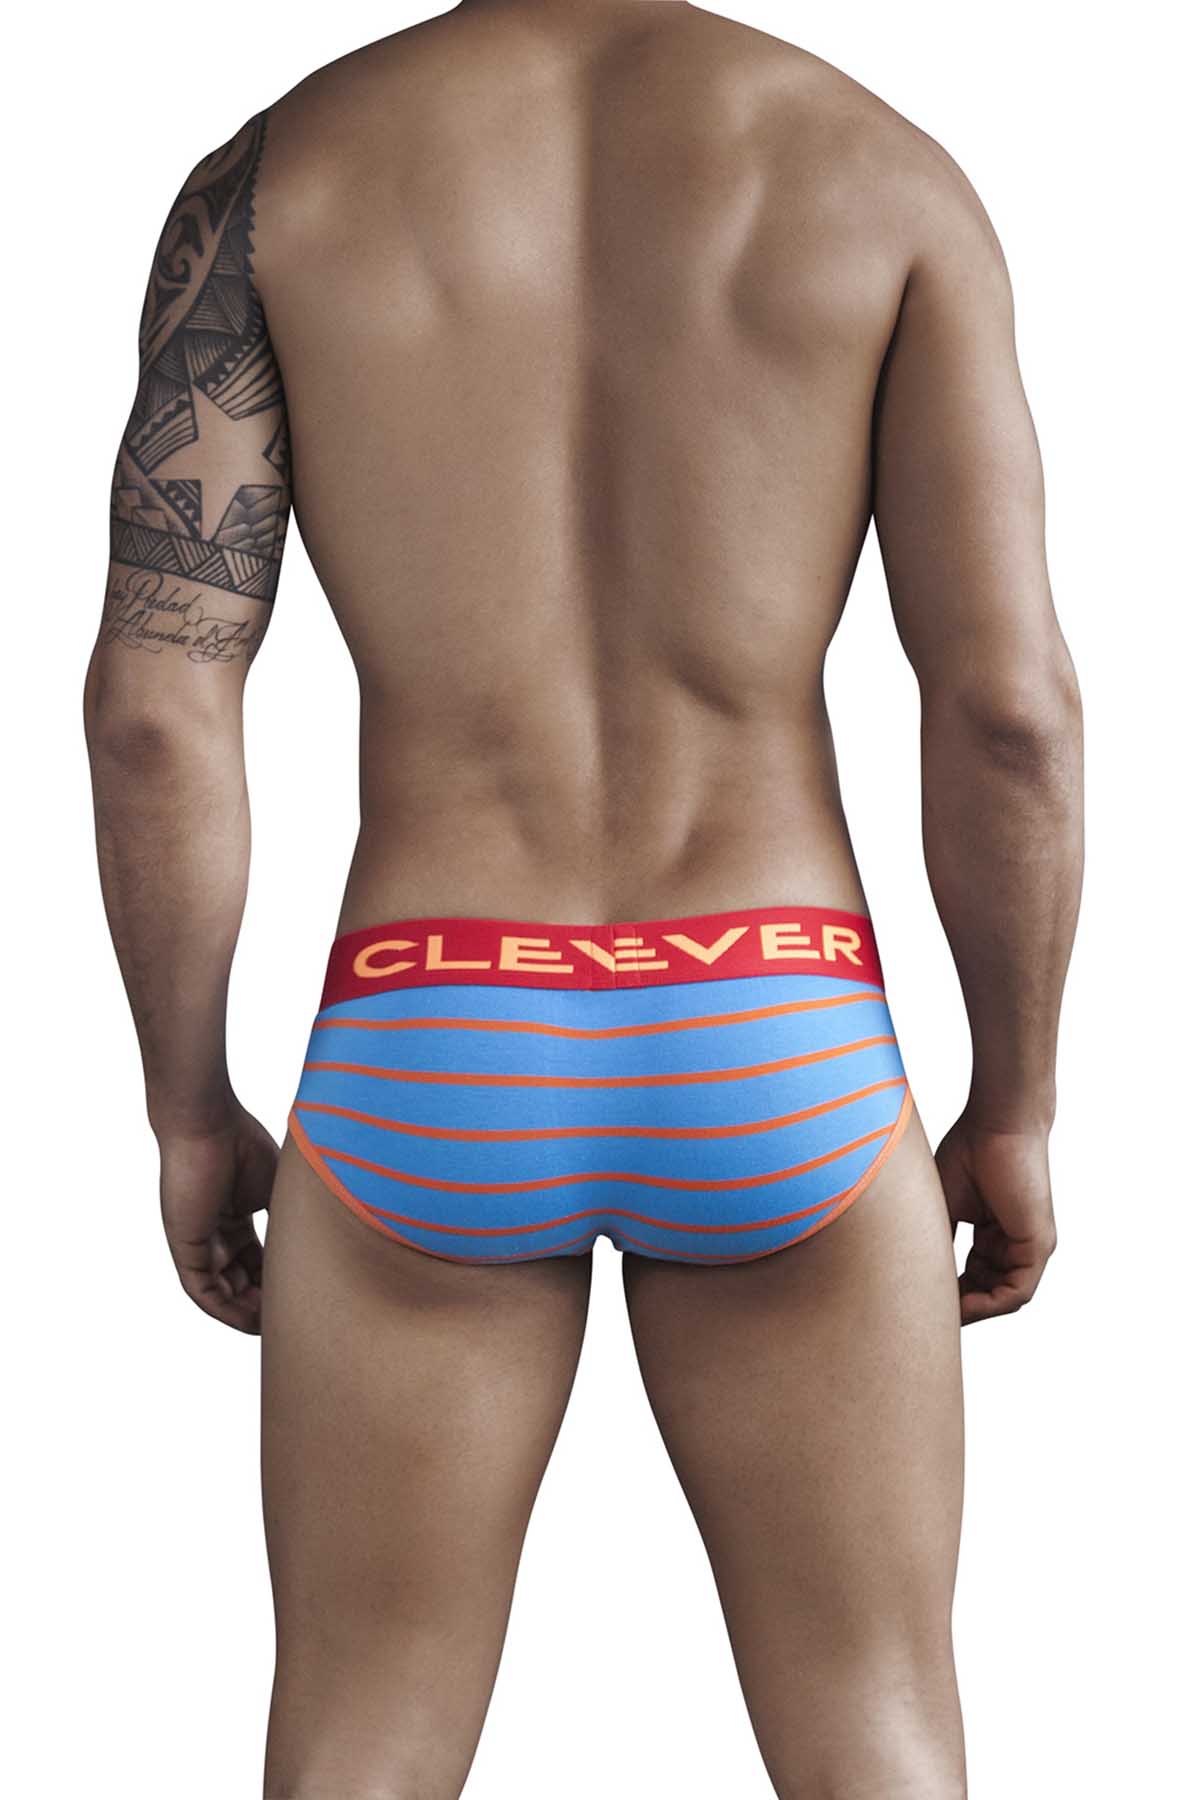 Clever Blue Mayan Pantheon Piping Brief